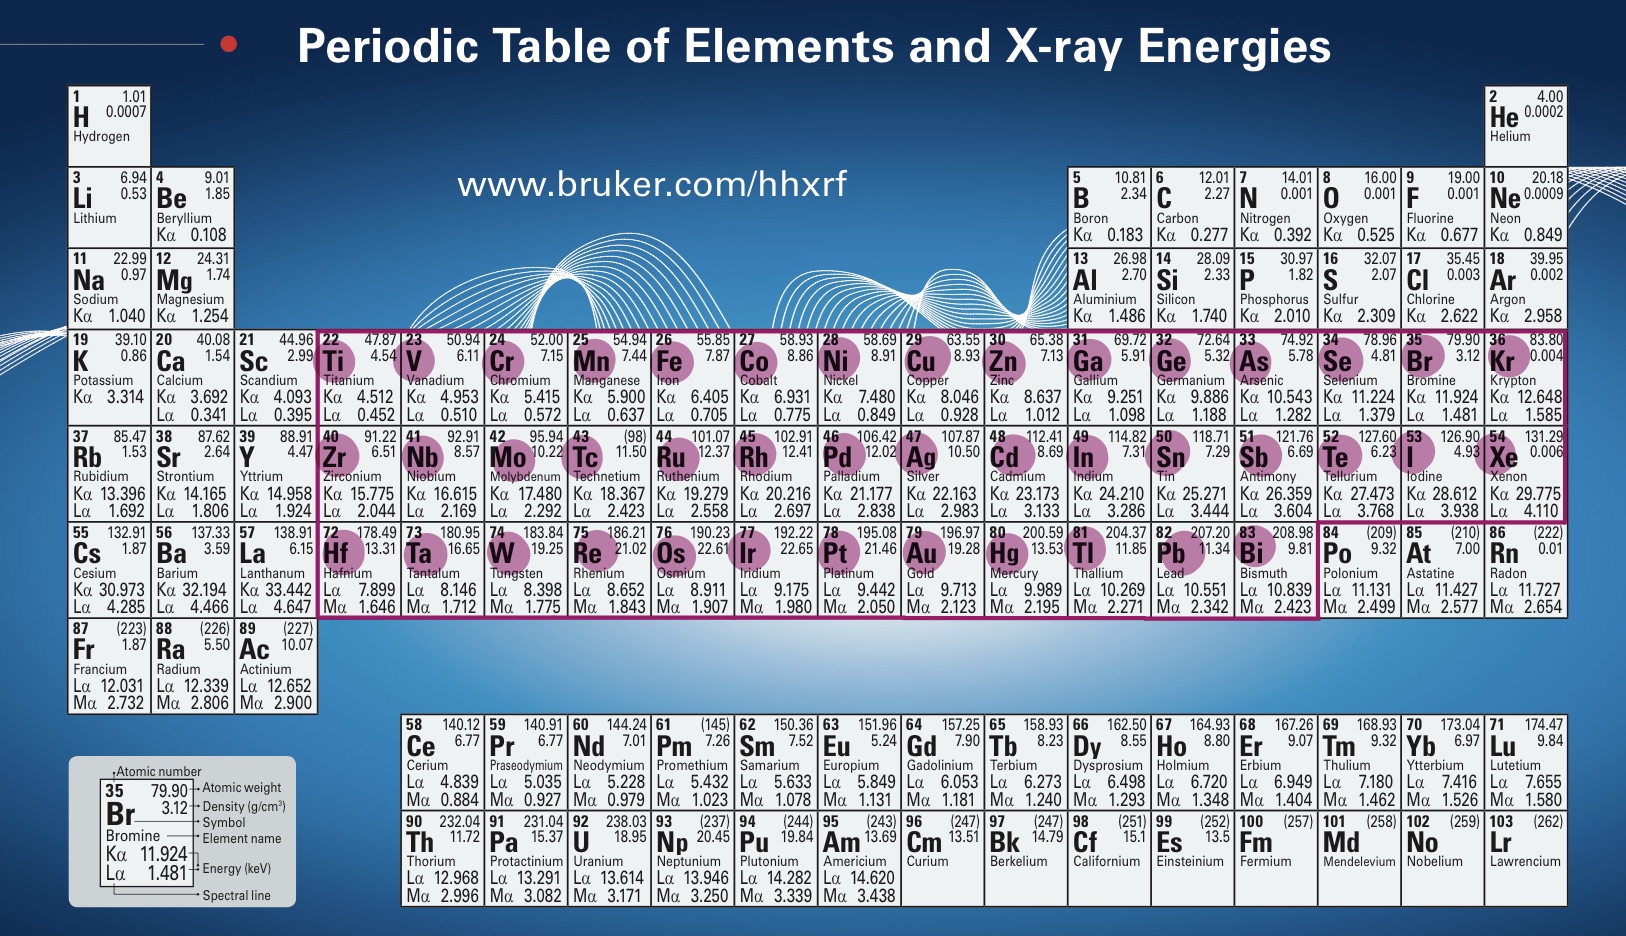 The elements that pXRF can detect are highlighted in magenta on the periodic table.